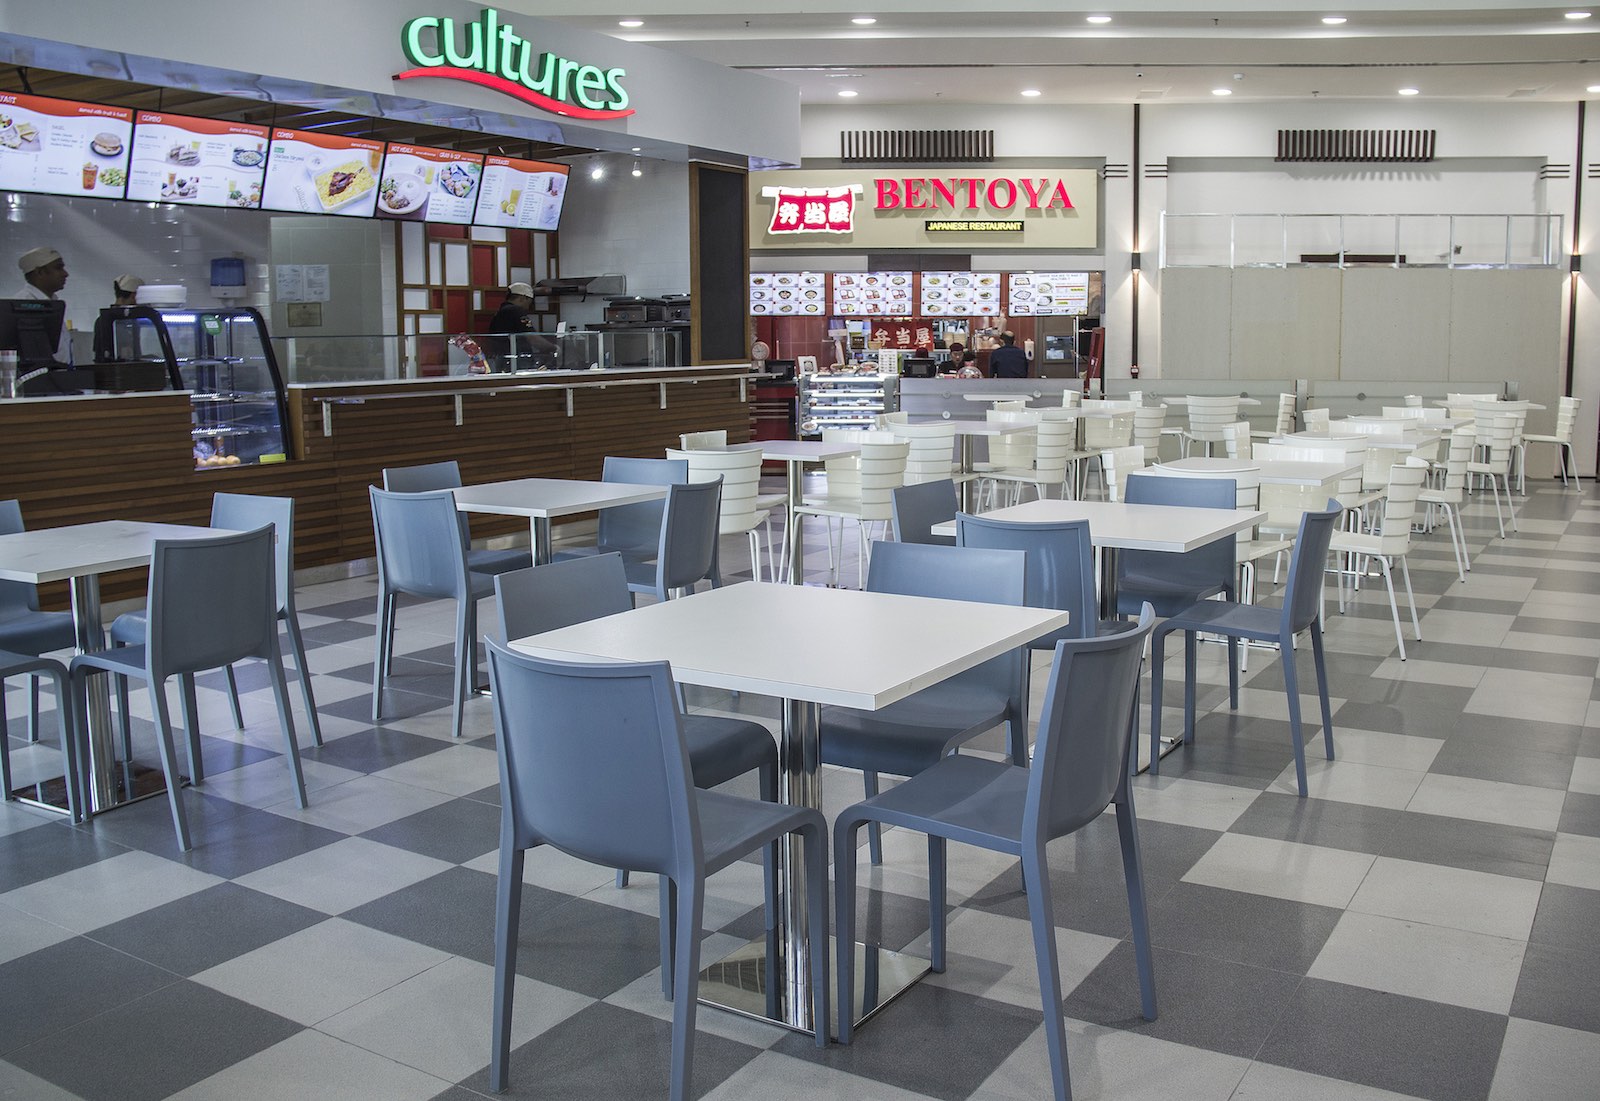 Tables and chairs of Jafza food court 15 with restaurants on the background